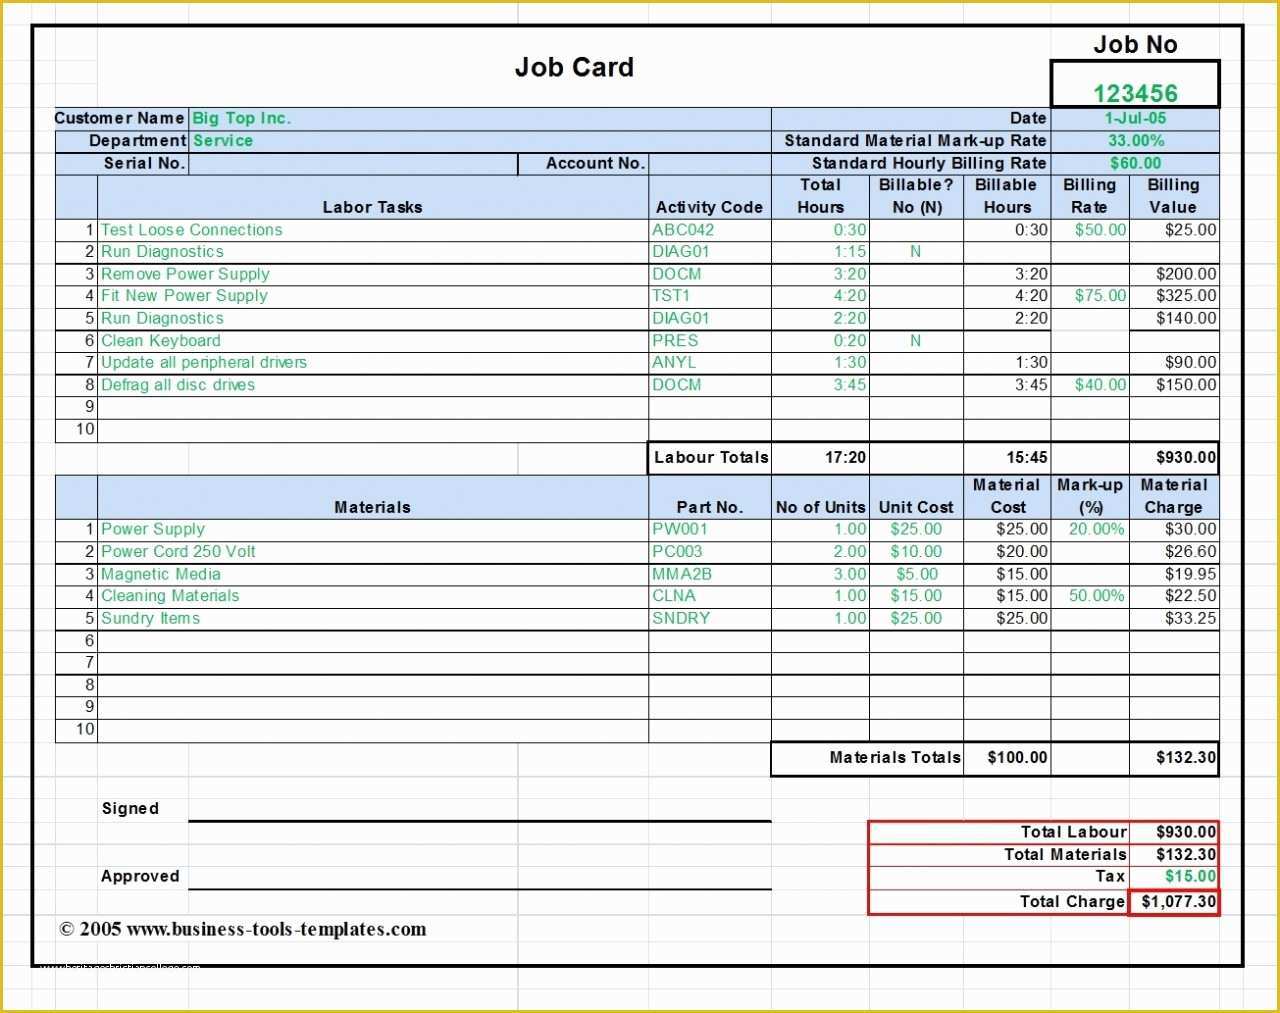 Job Costing Template Free Download Of Labor and Material Cost Estimator Job Card Template Excel